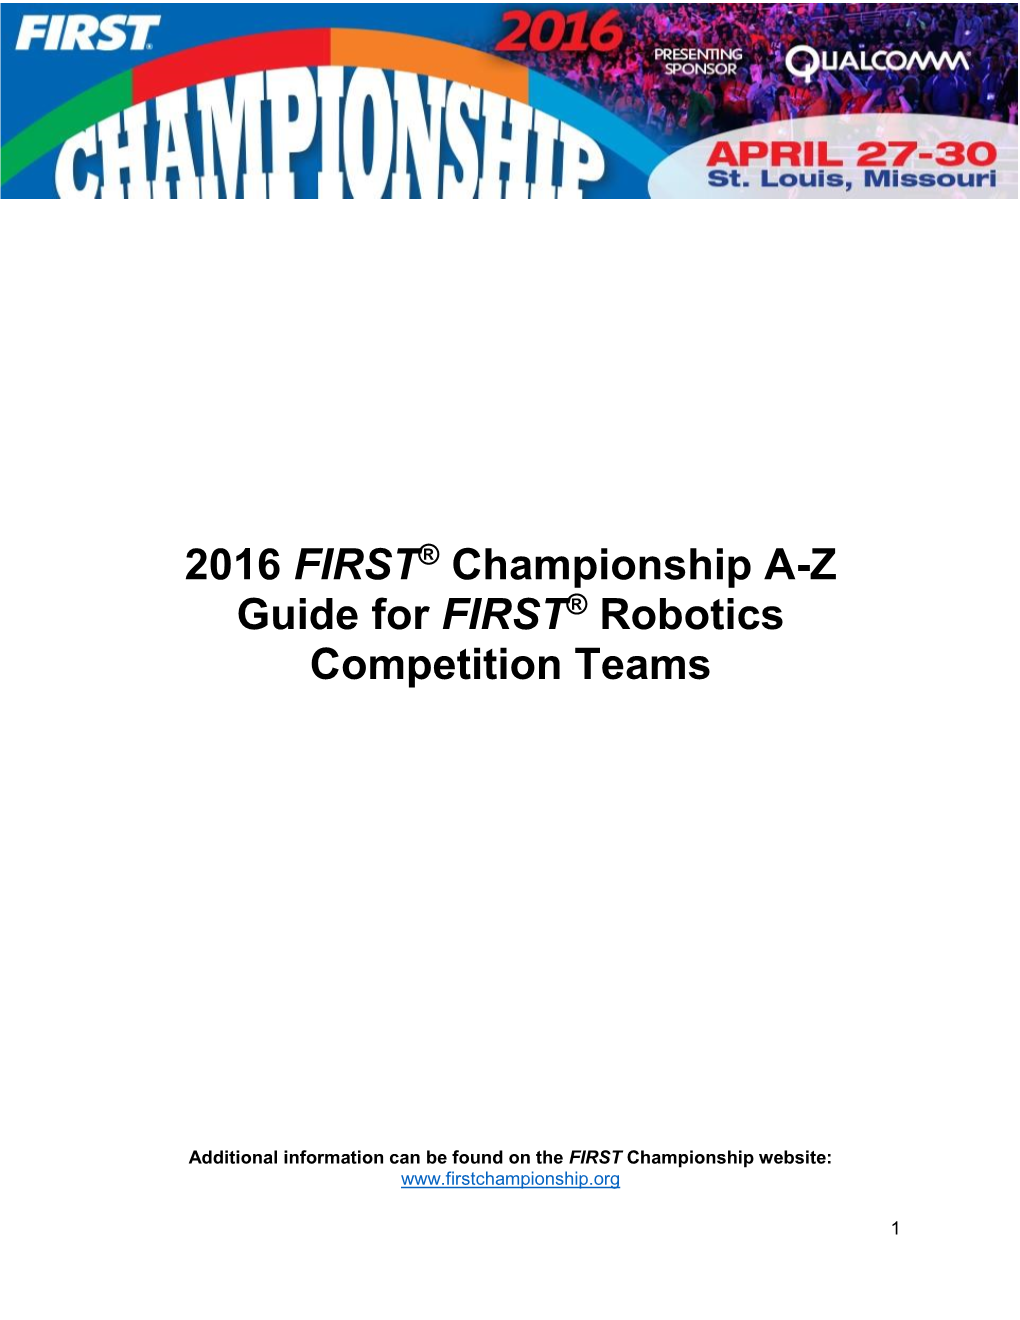 2016 FIRST® Championship A-Z Guide for FIRST® Robotics Competition Teams